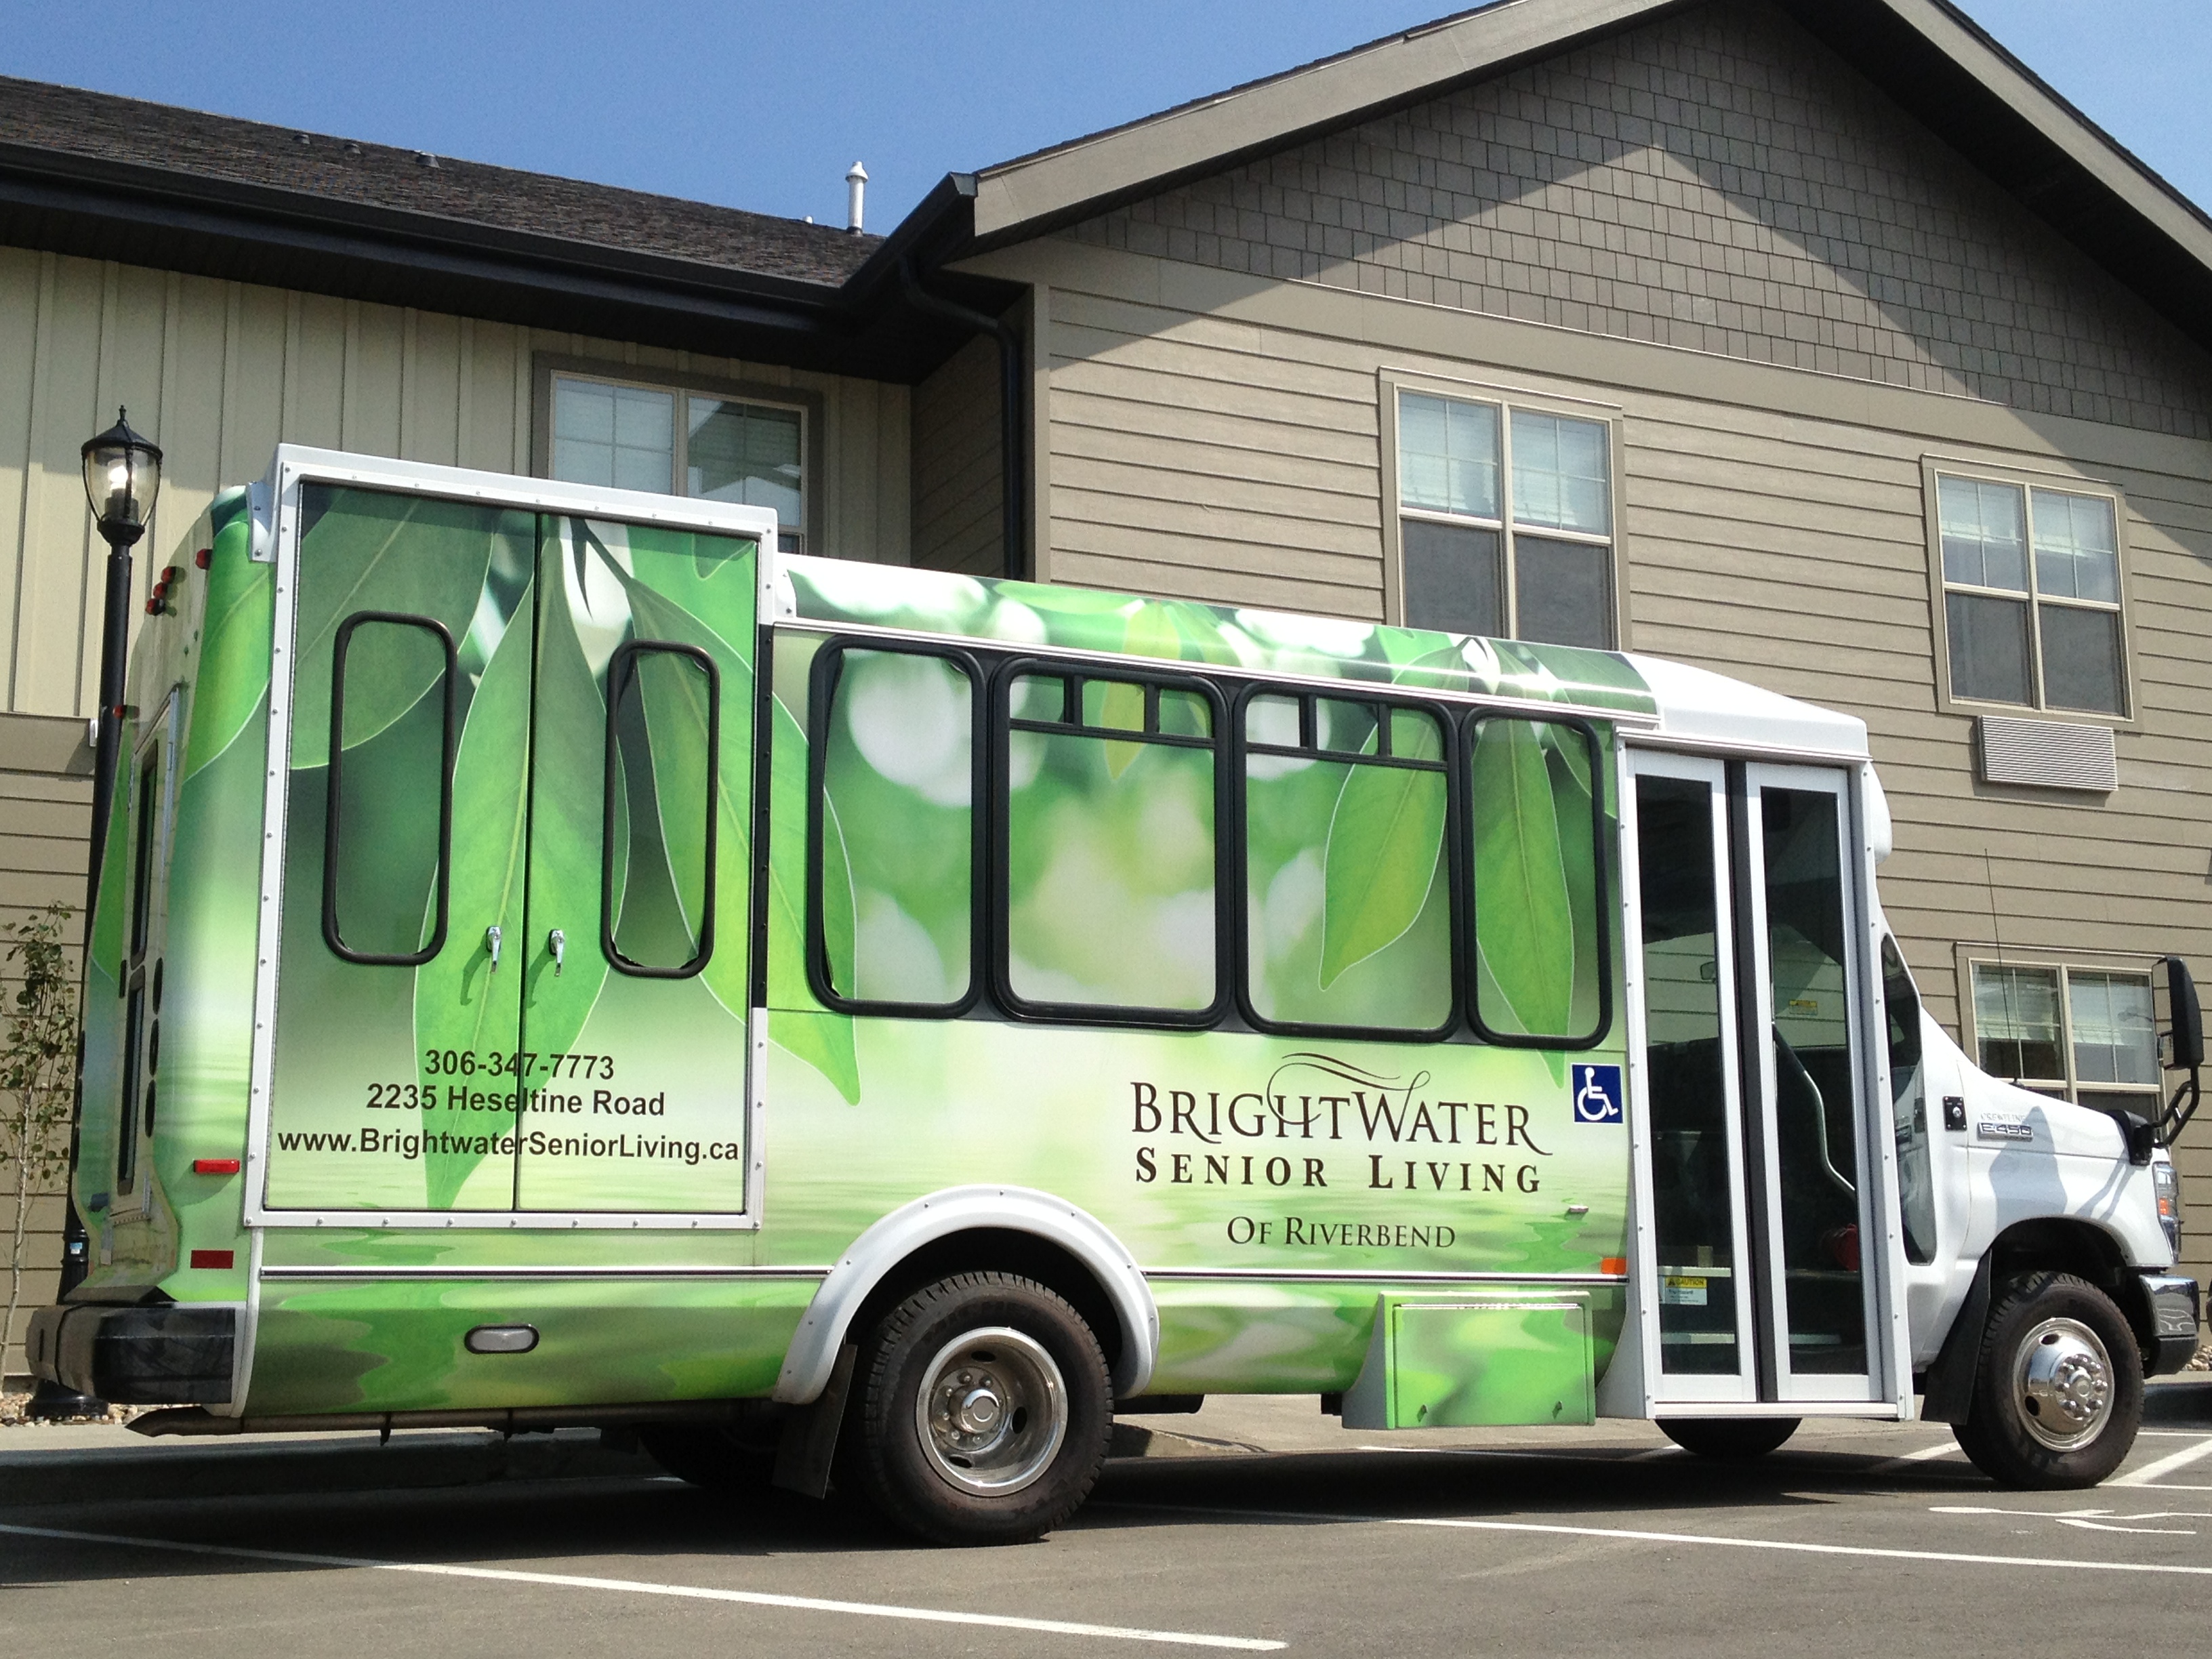 Brightwater Senior Living of Riverbend's Bus